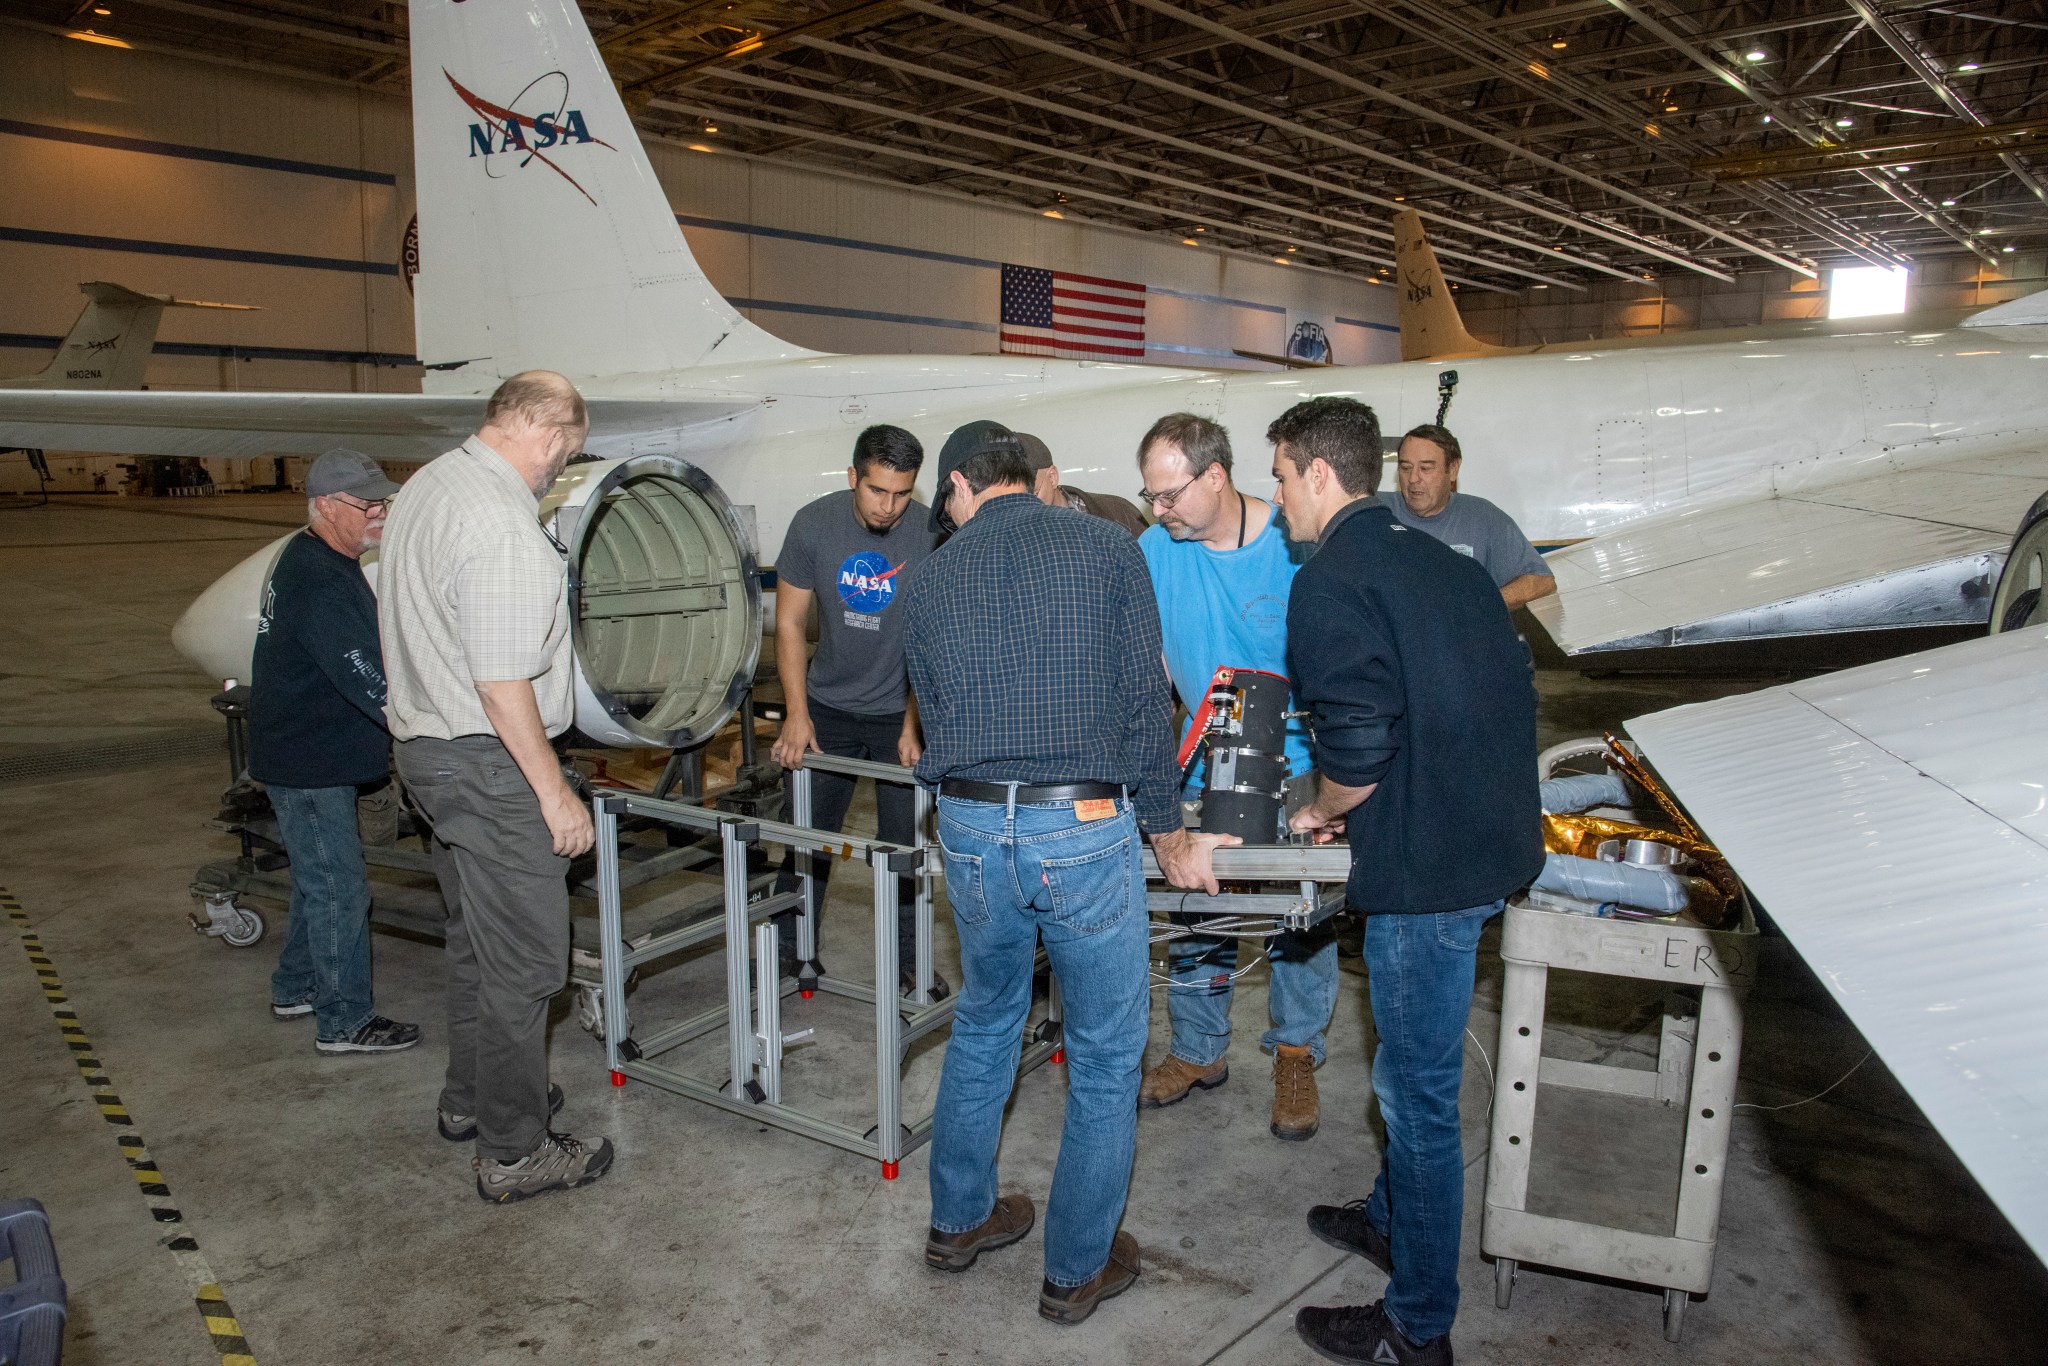 A crew of people loading a mechanical instrument into a casing hanging below one wing of the ER-2 plane.